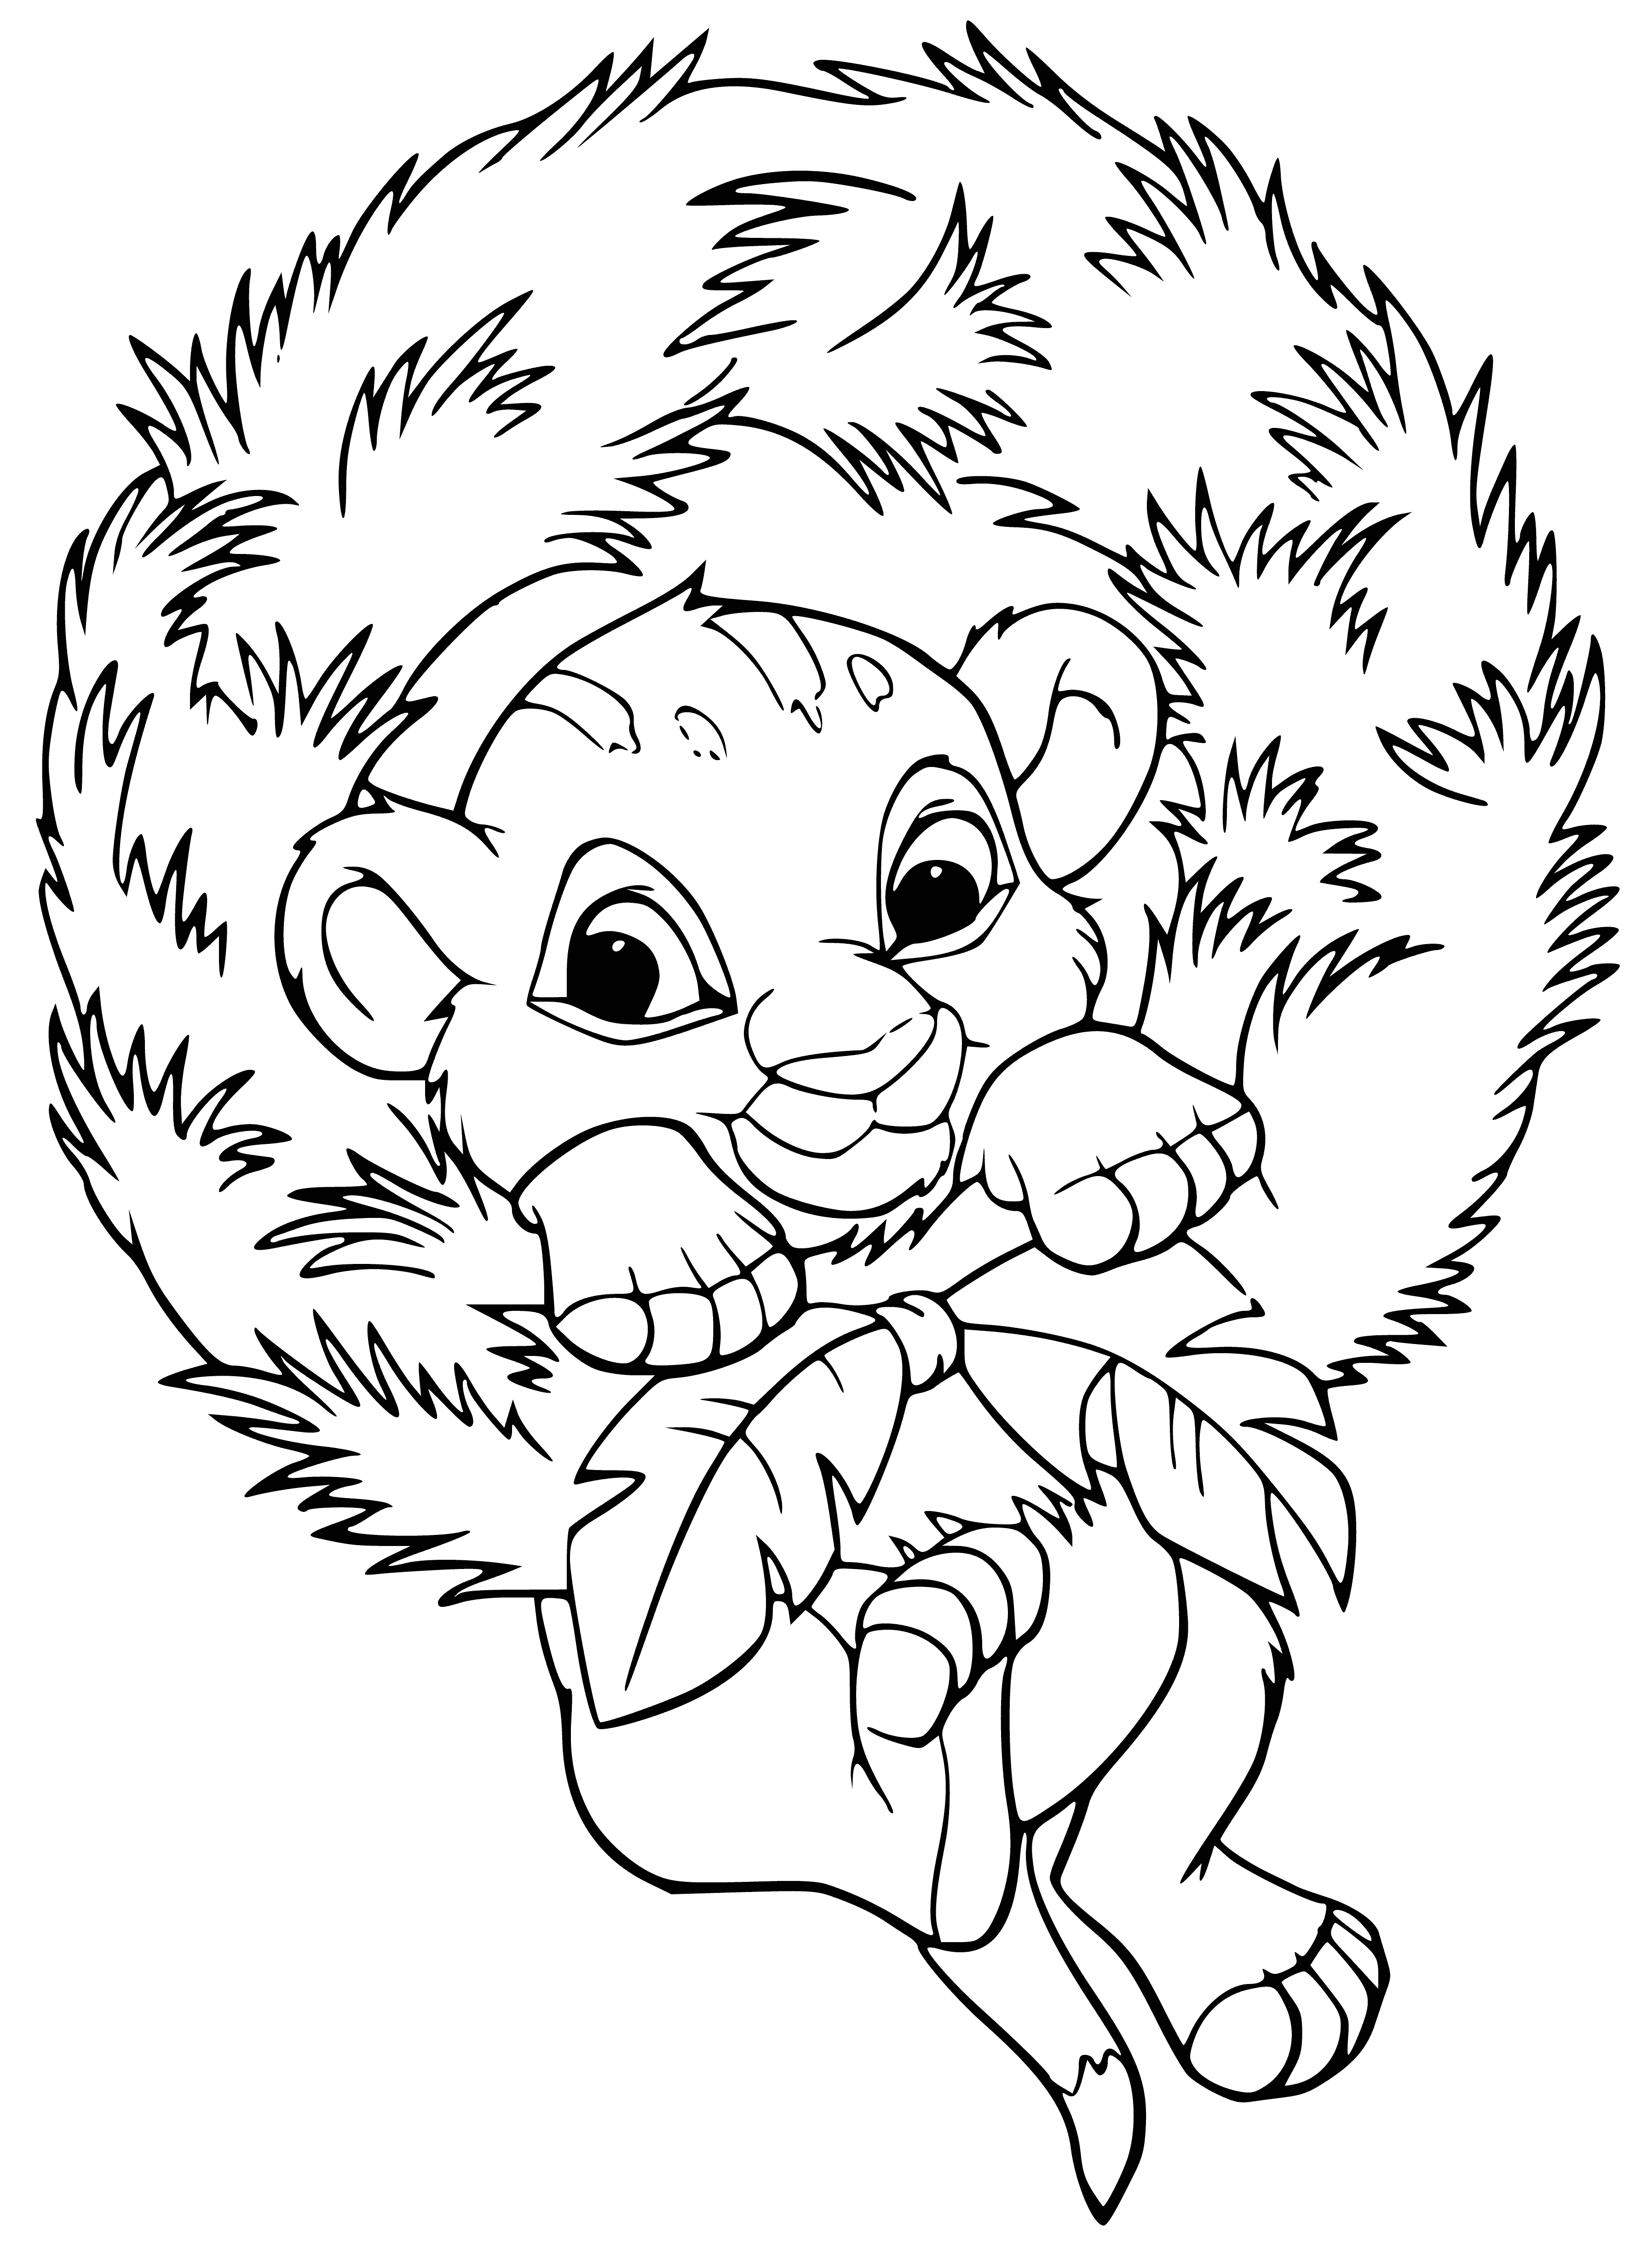 coloring page: Six Disney characters stand in a semi-circle celebrating the New Year, with fireworks going off at the top of a large tree.